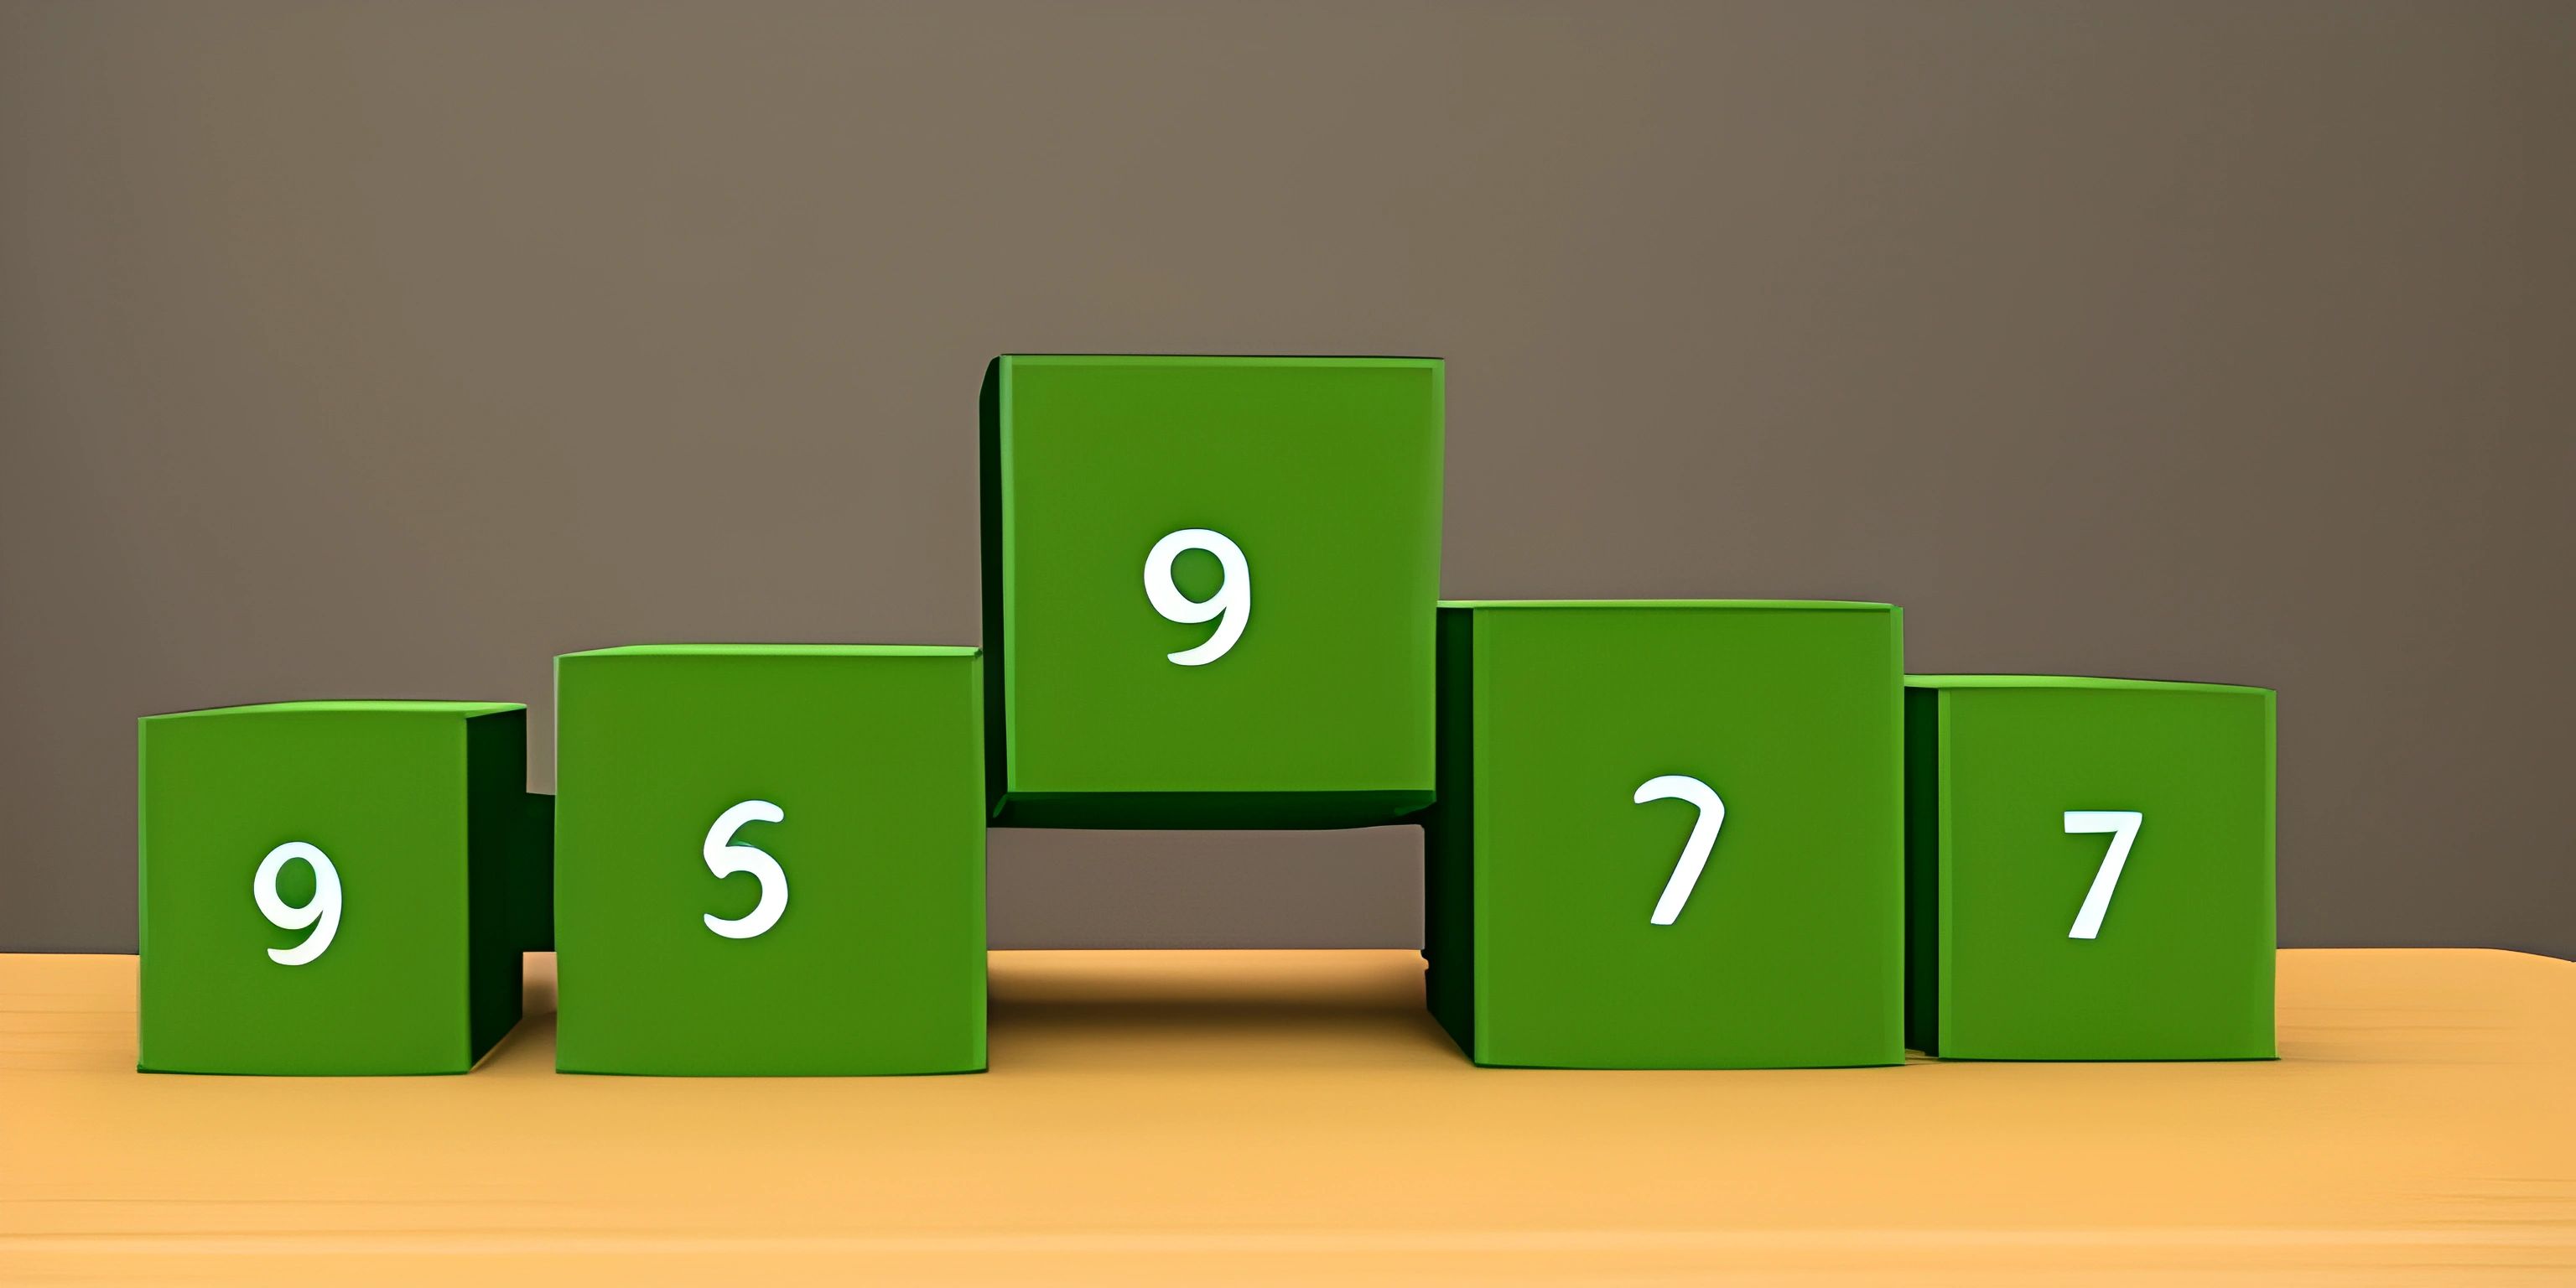 some very cute green cubes on top of a table in front of a brown background